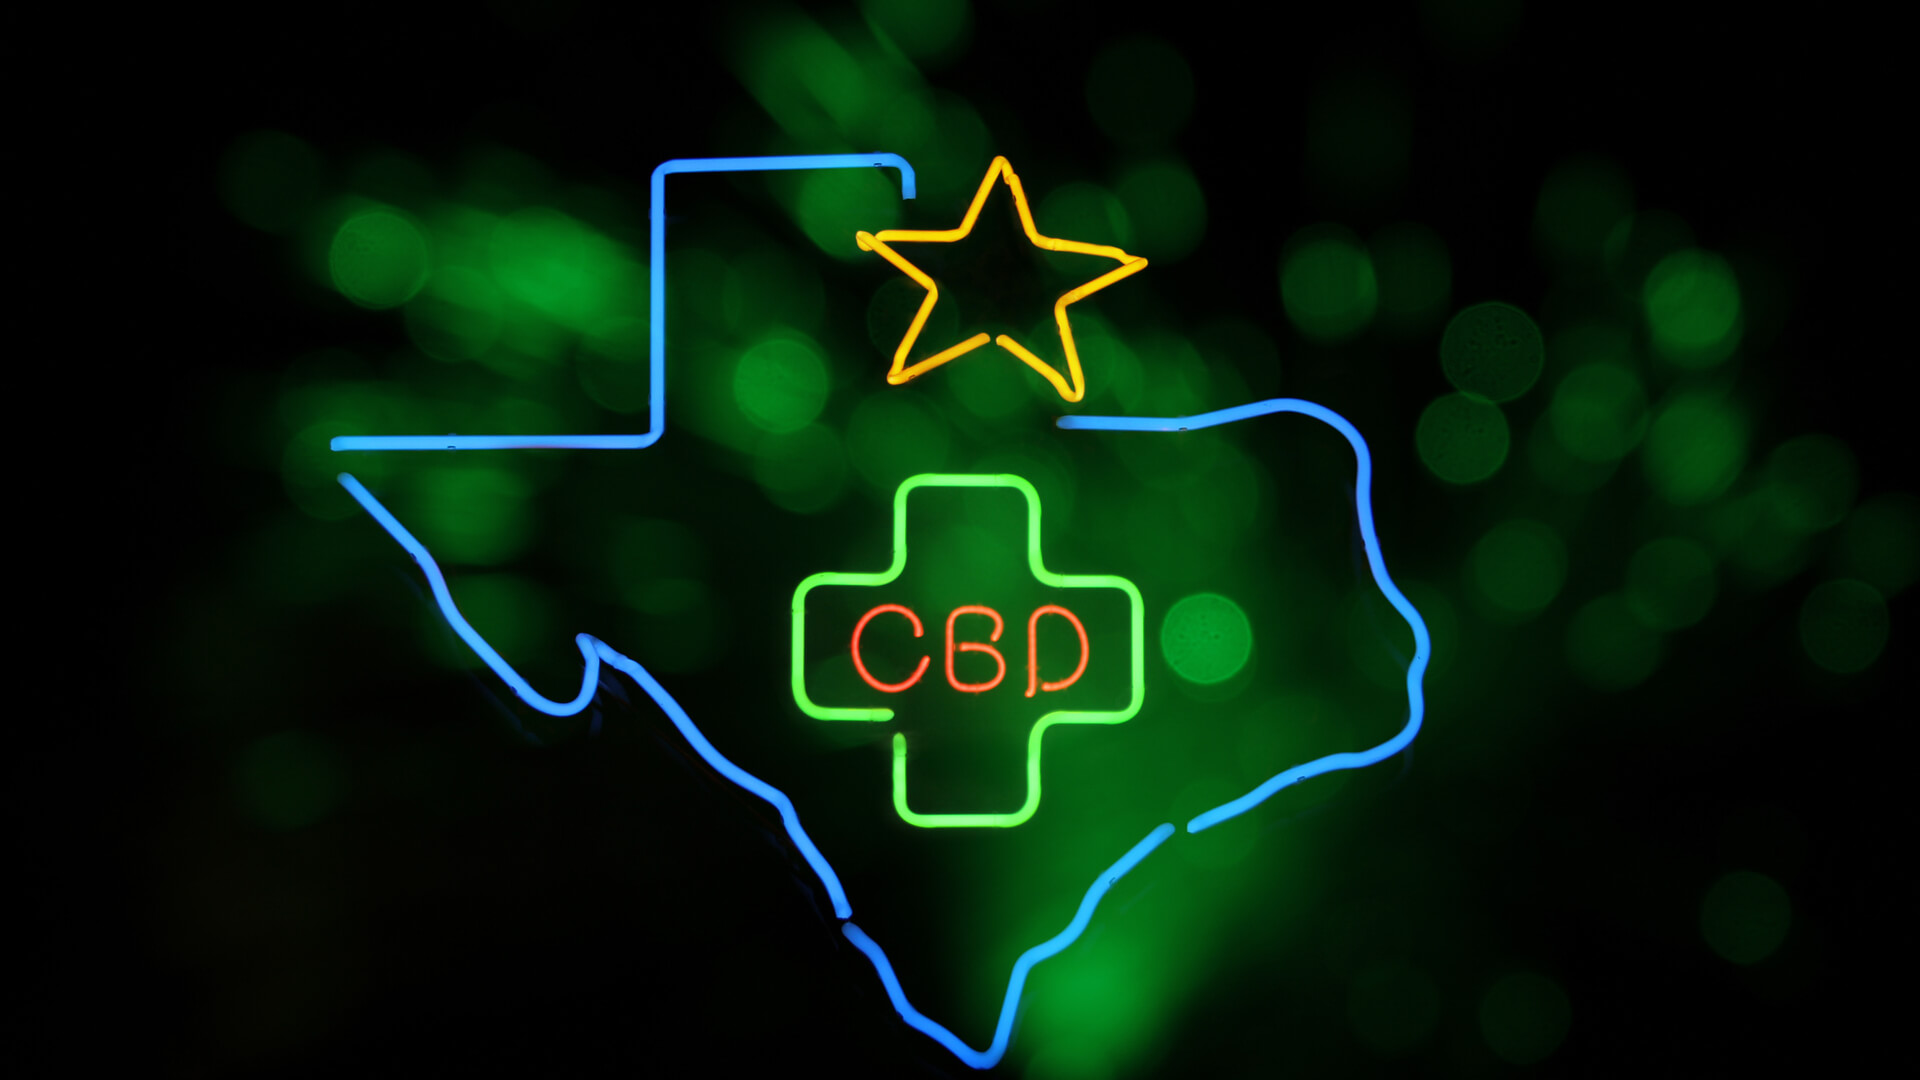 LED sign of the State of Texas with CBD sign in the middle